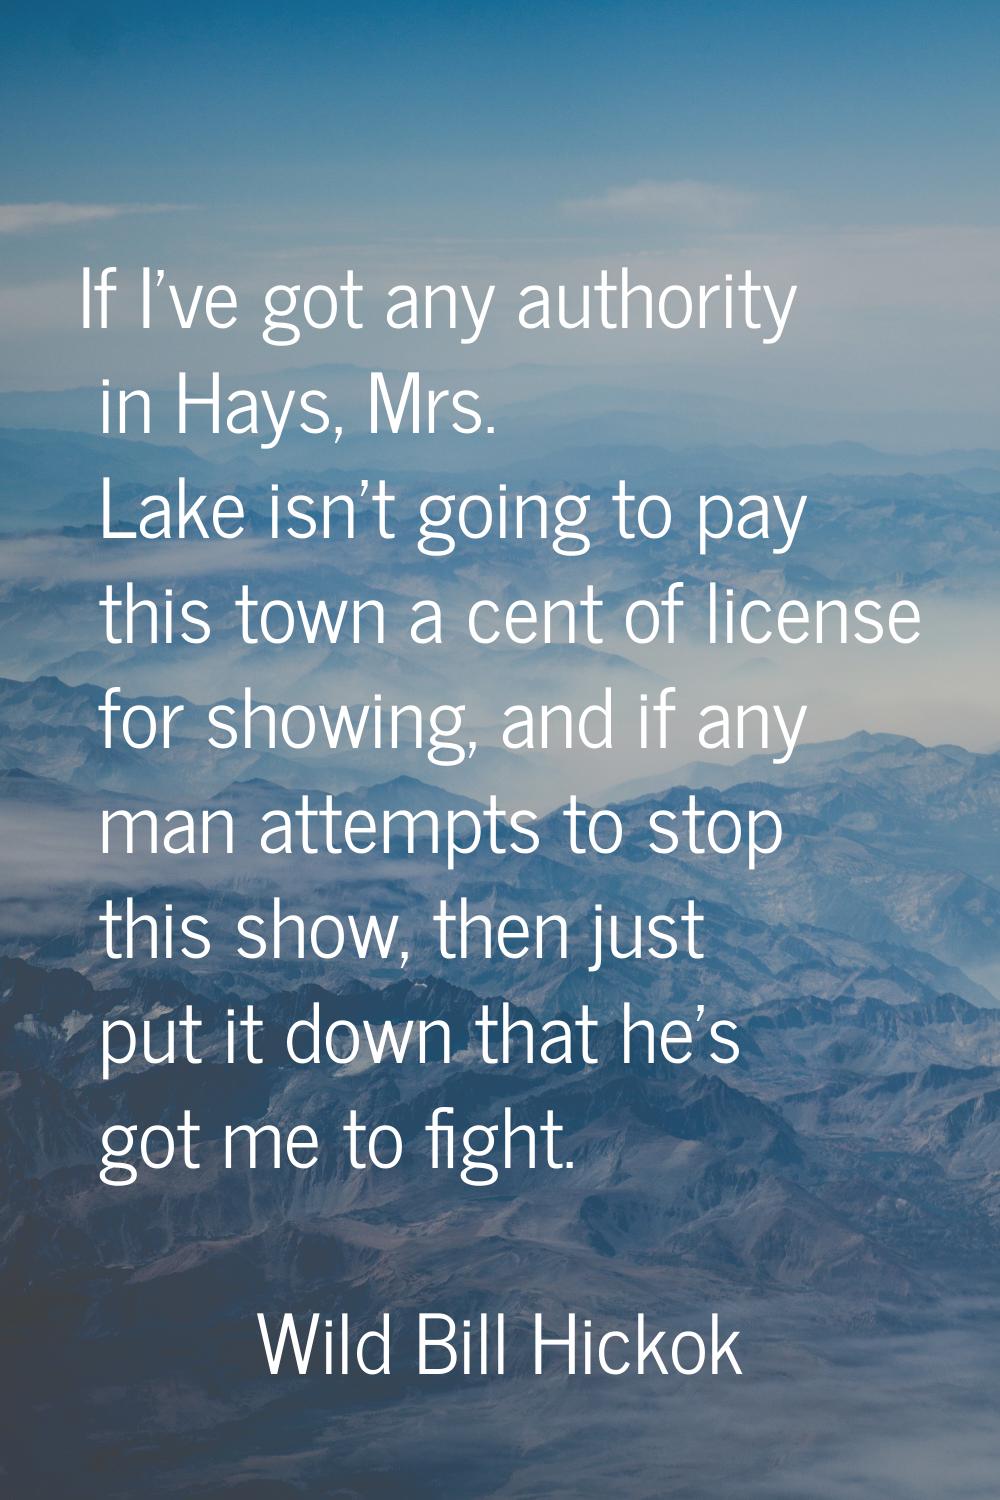 If I've got any authority in Hays, Mrs. Lake isn't going to pay this town a cent of license for sho